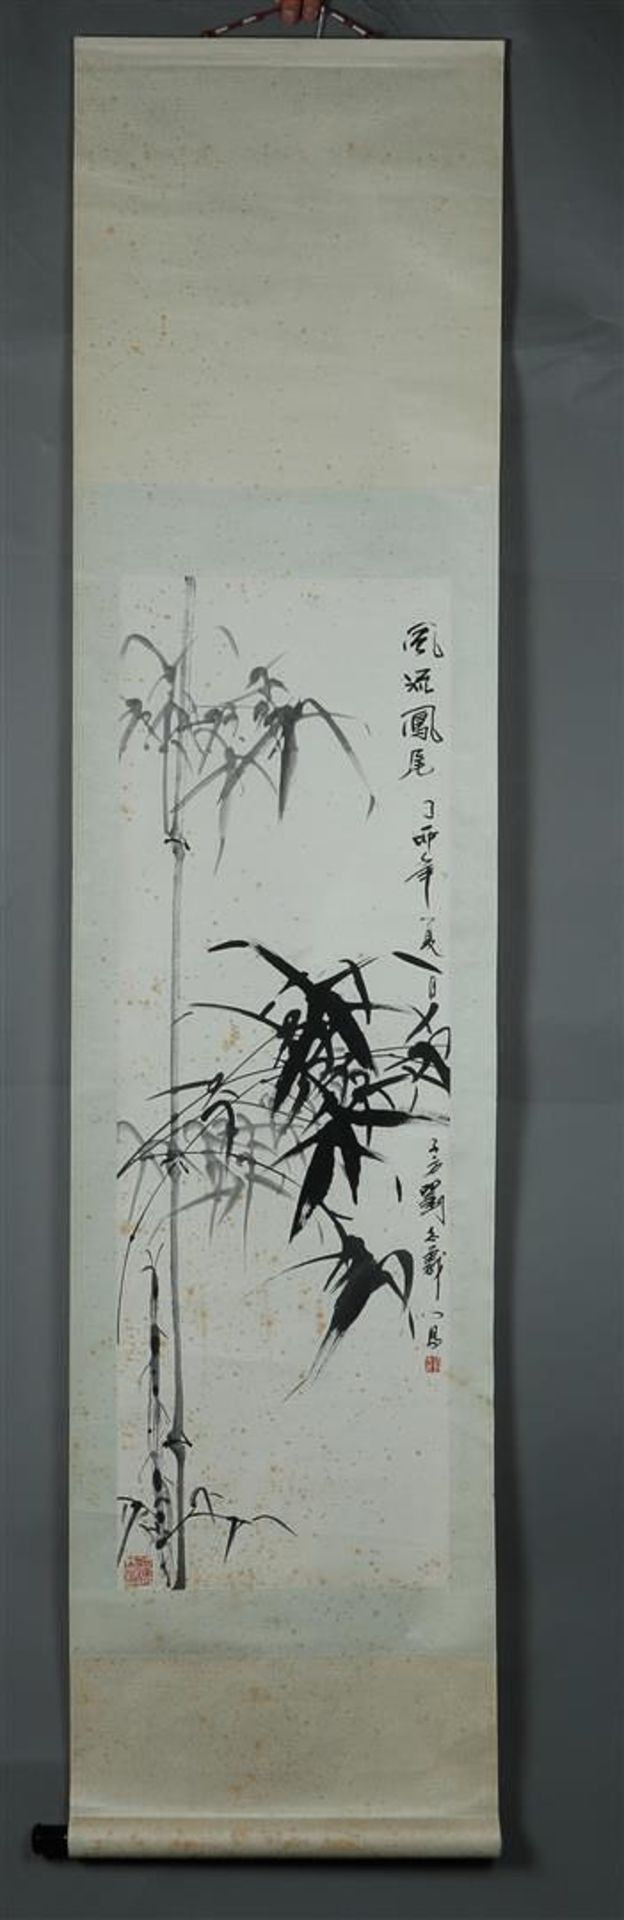 A Chinese scroll drawing depicting reeds on the waterfront. With signature and Chinese characters.